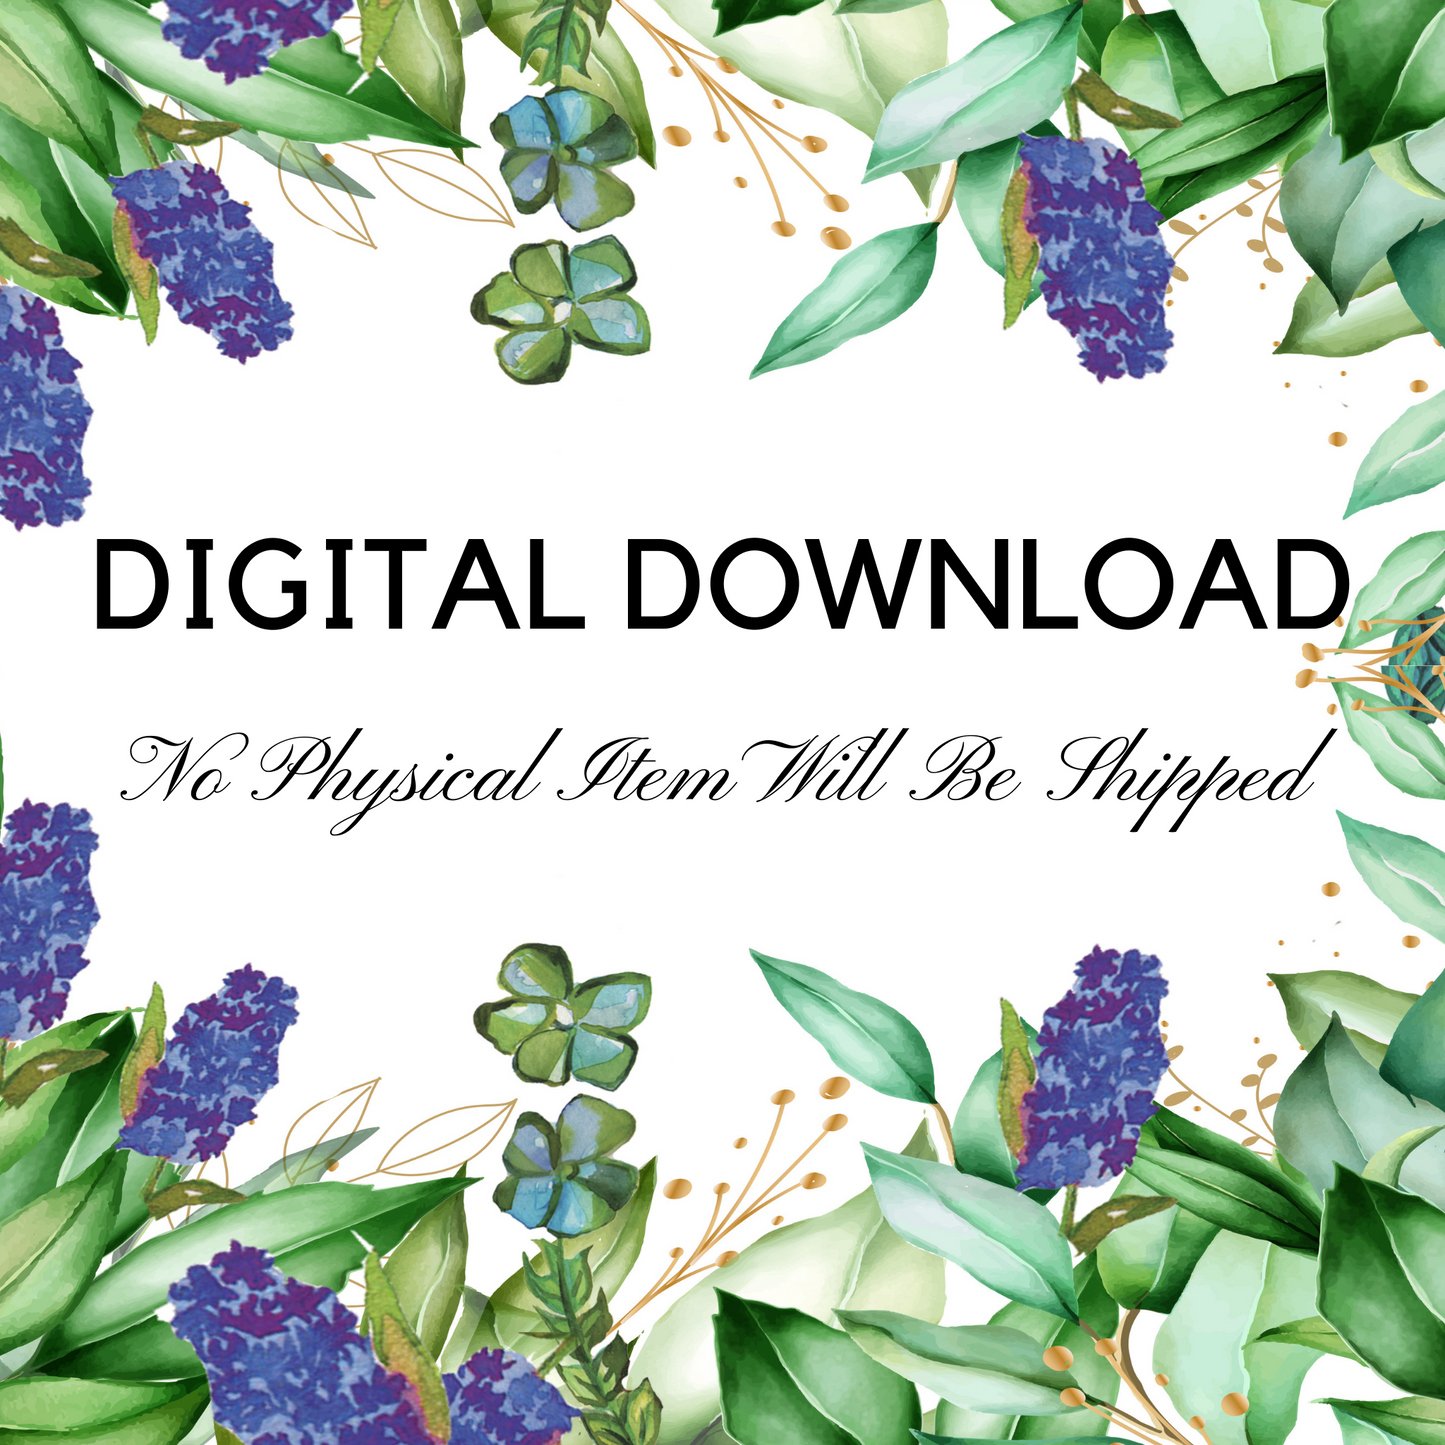 The announcement of the digital download